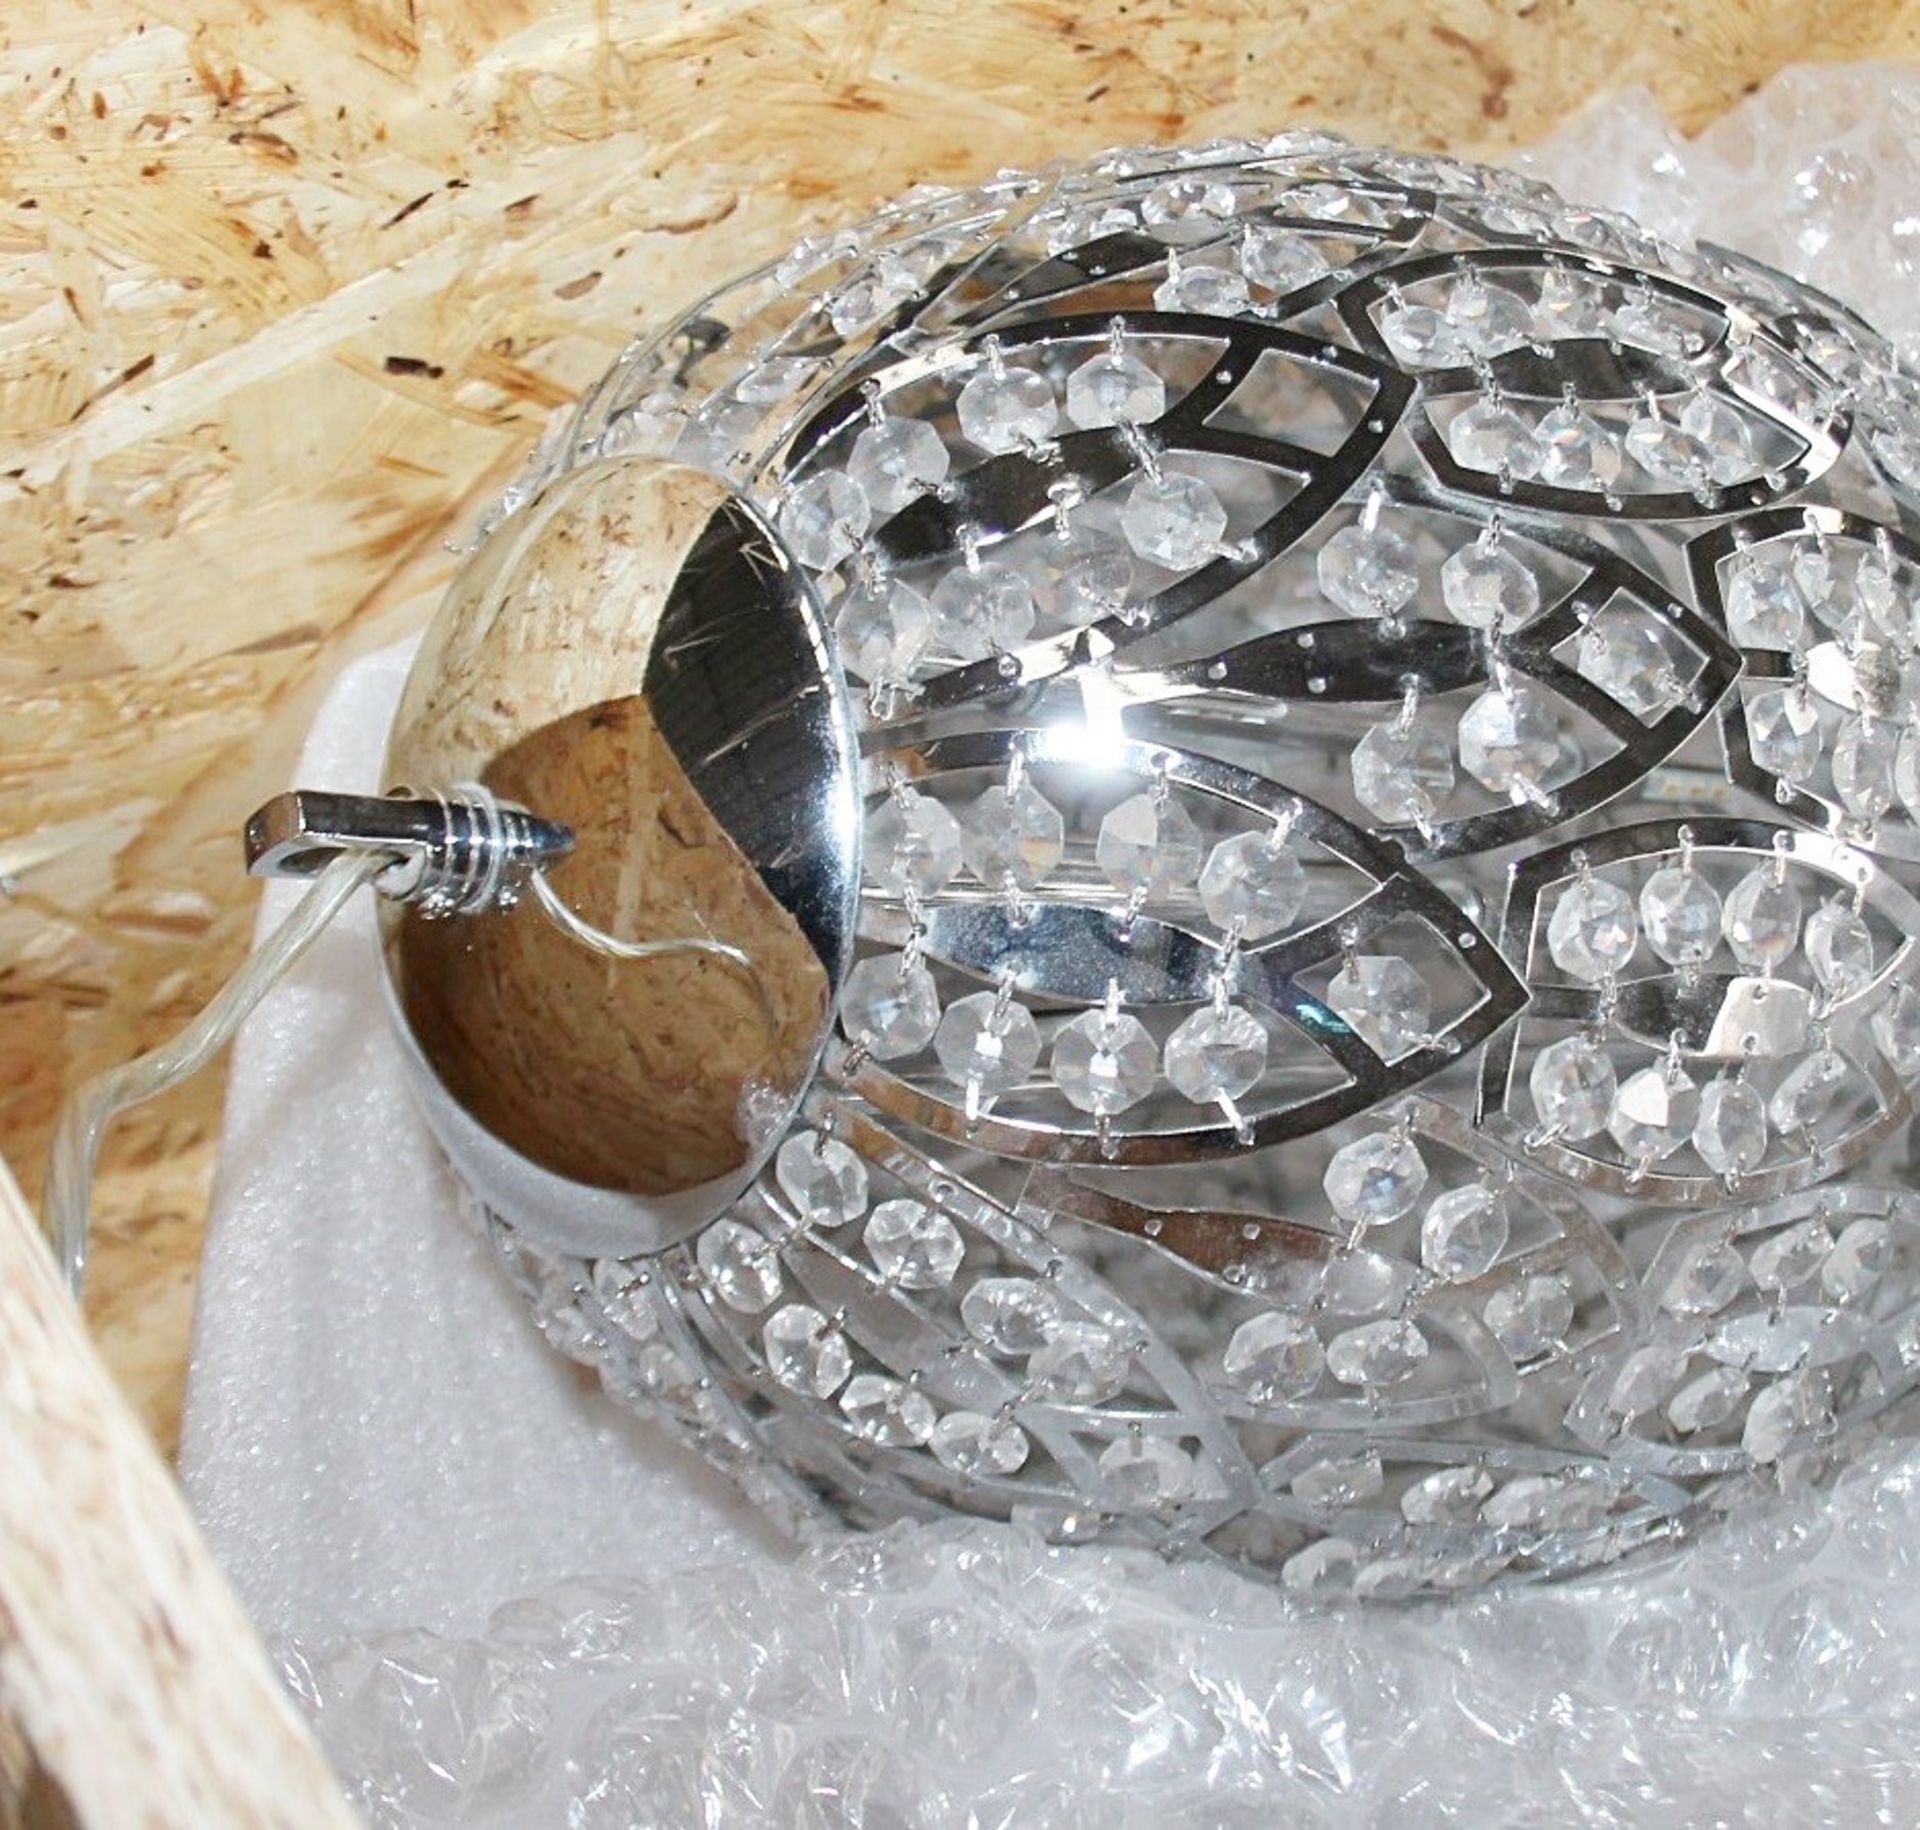 1 x High-end Italian LED Egg-Shaped Light Fitting Encrusted In Premium ASFOUR Crystals - RRP £4,000 - Image 2 of 9